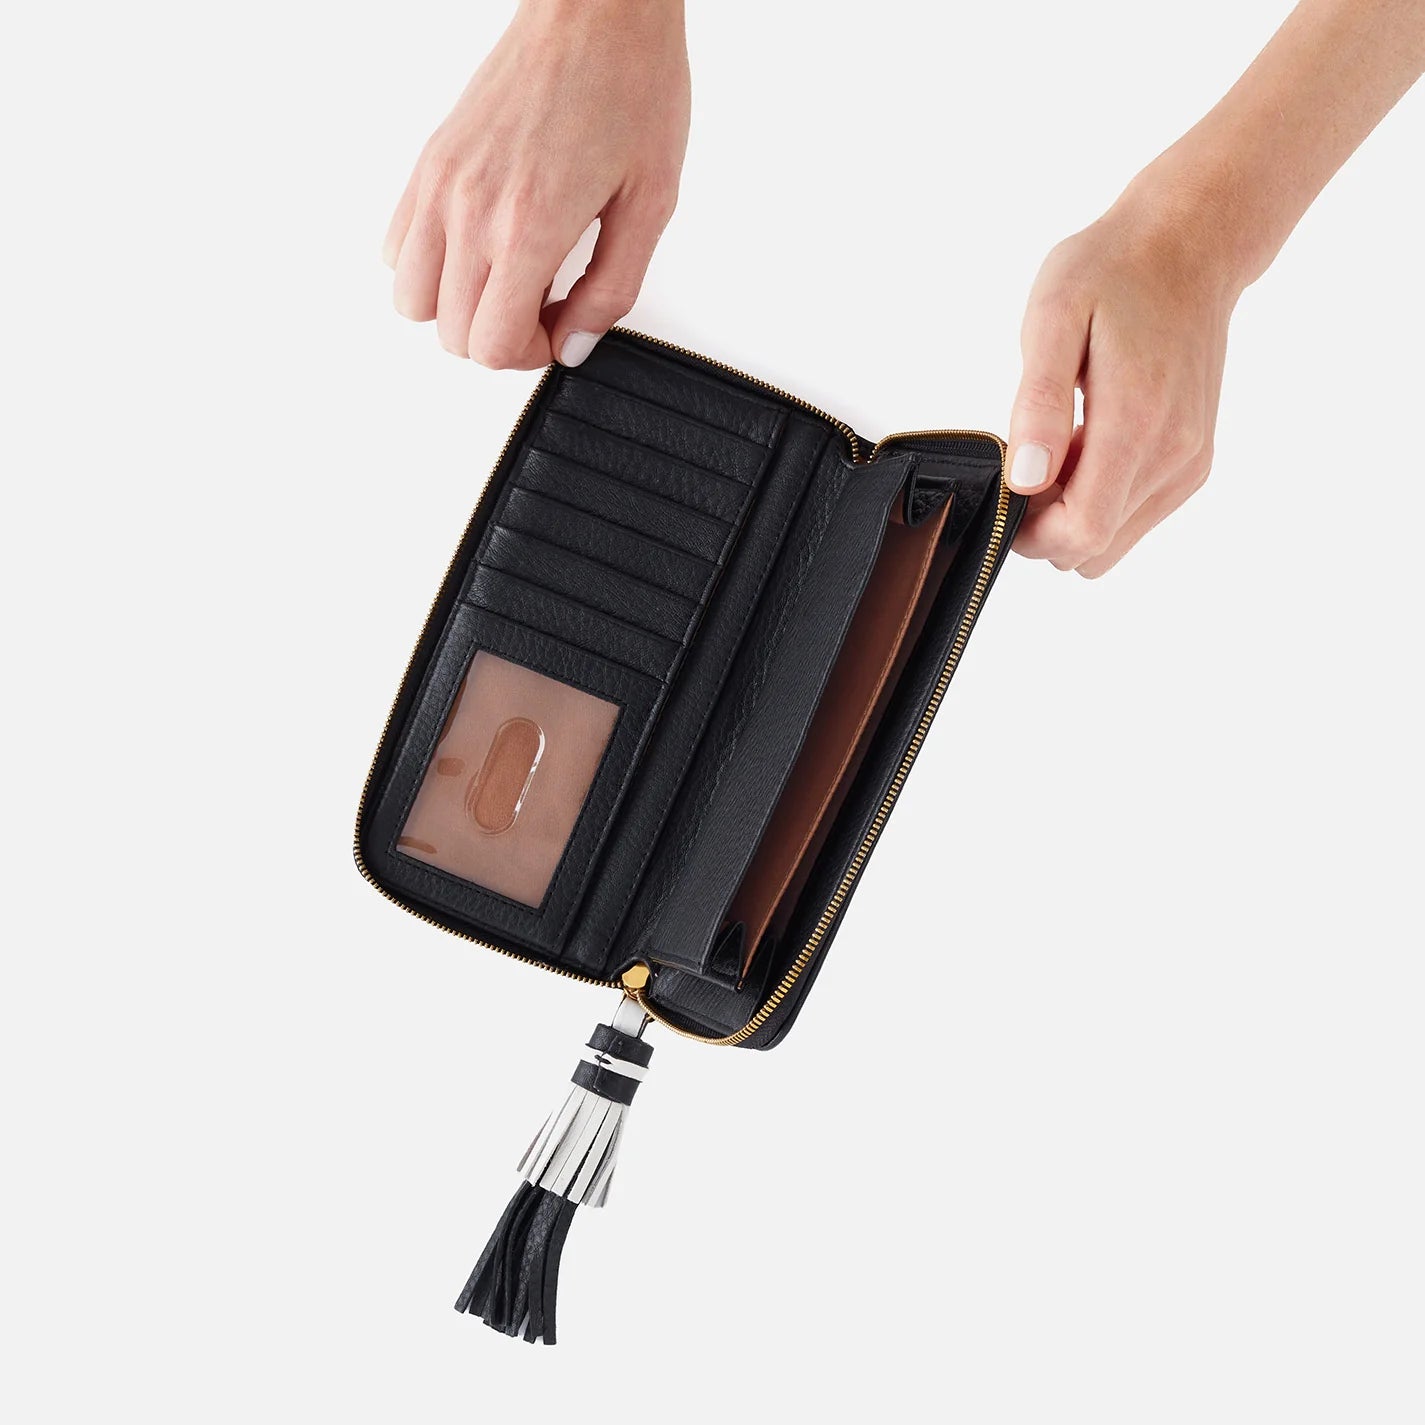 The Nila Large Zip Around Wallet in black is a continental design with interior organization for your cash and cards and a leather tassel zipper for added style and functionality. Check it out at the Painted Cottage in Edgewater, MD